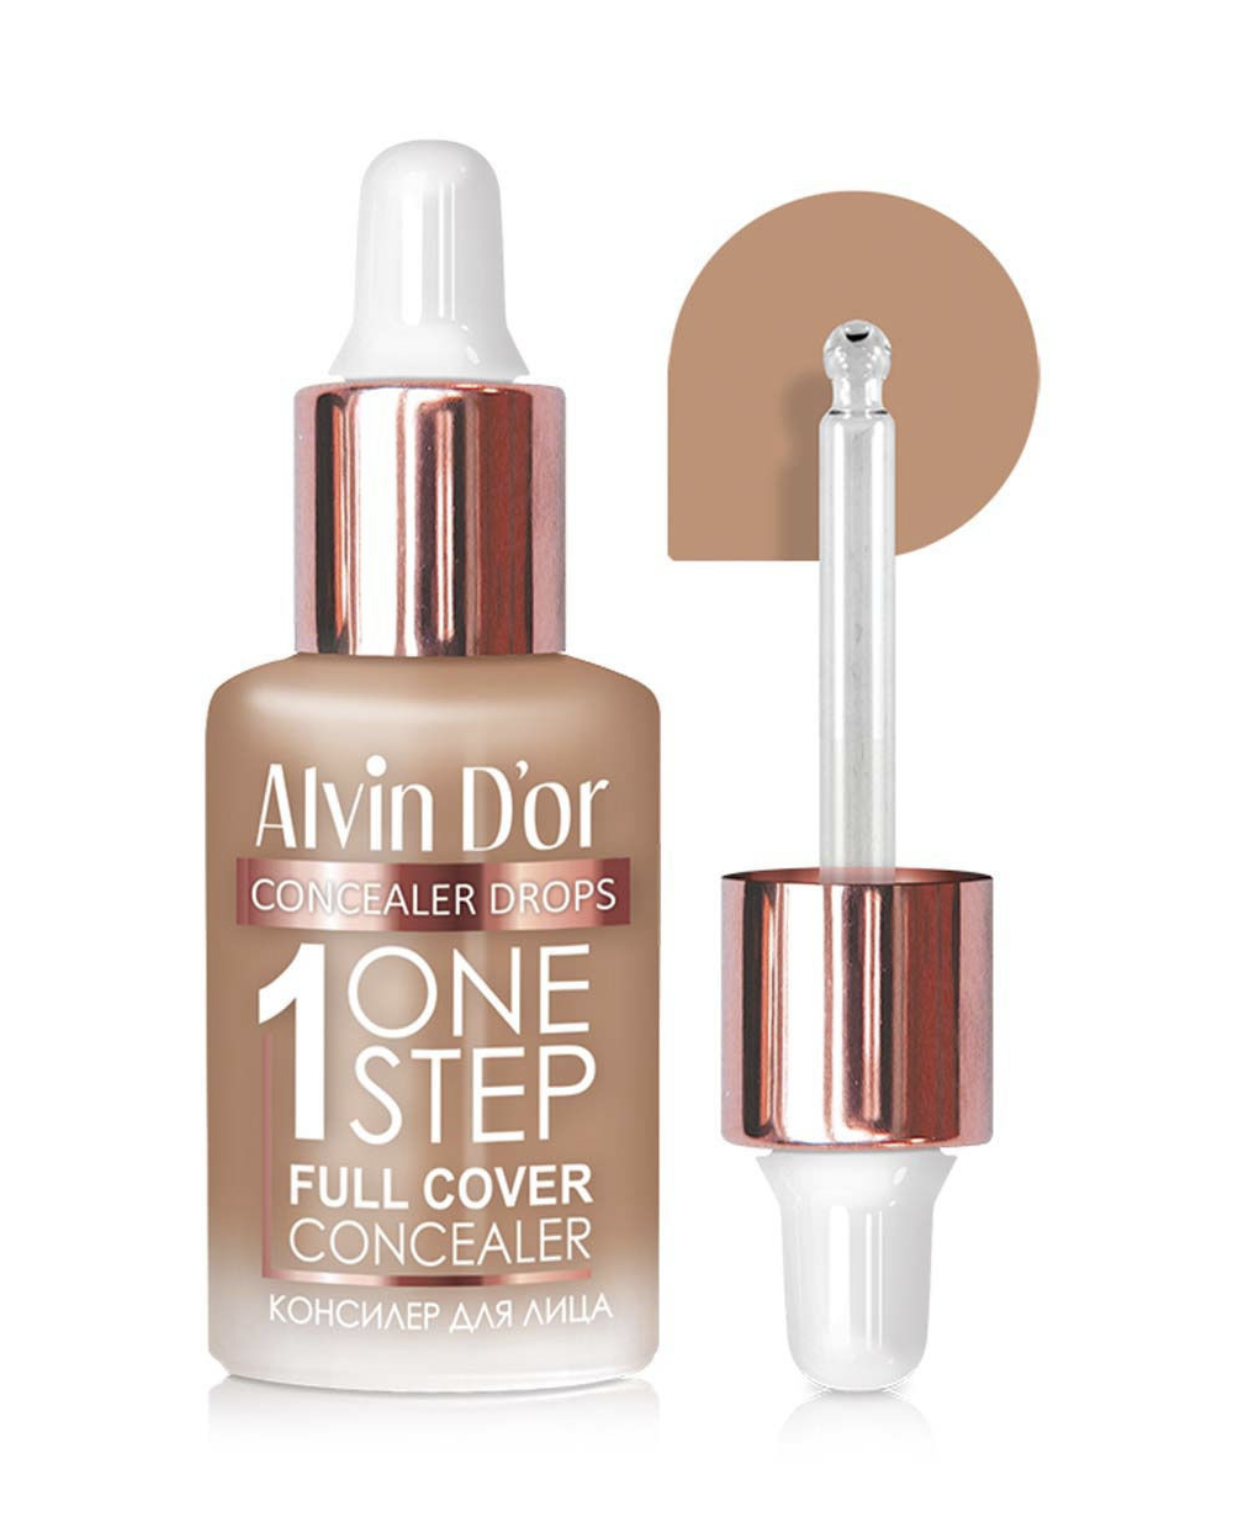    / Alvin D'or -     1 One Step drops CFD-01 05   8 